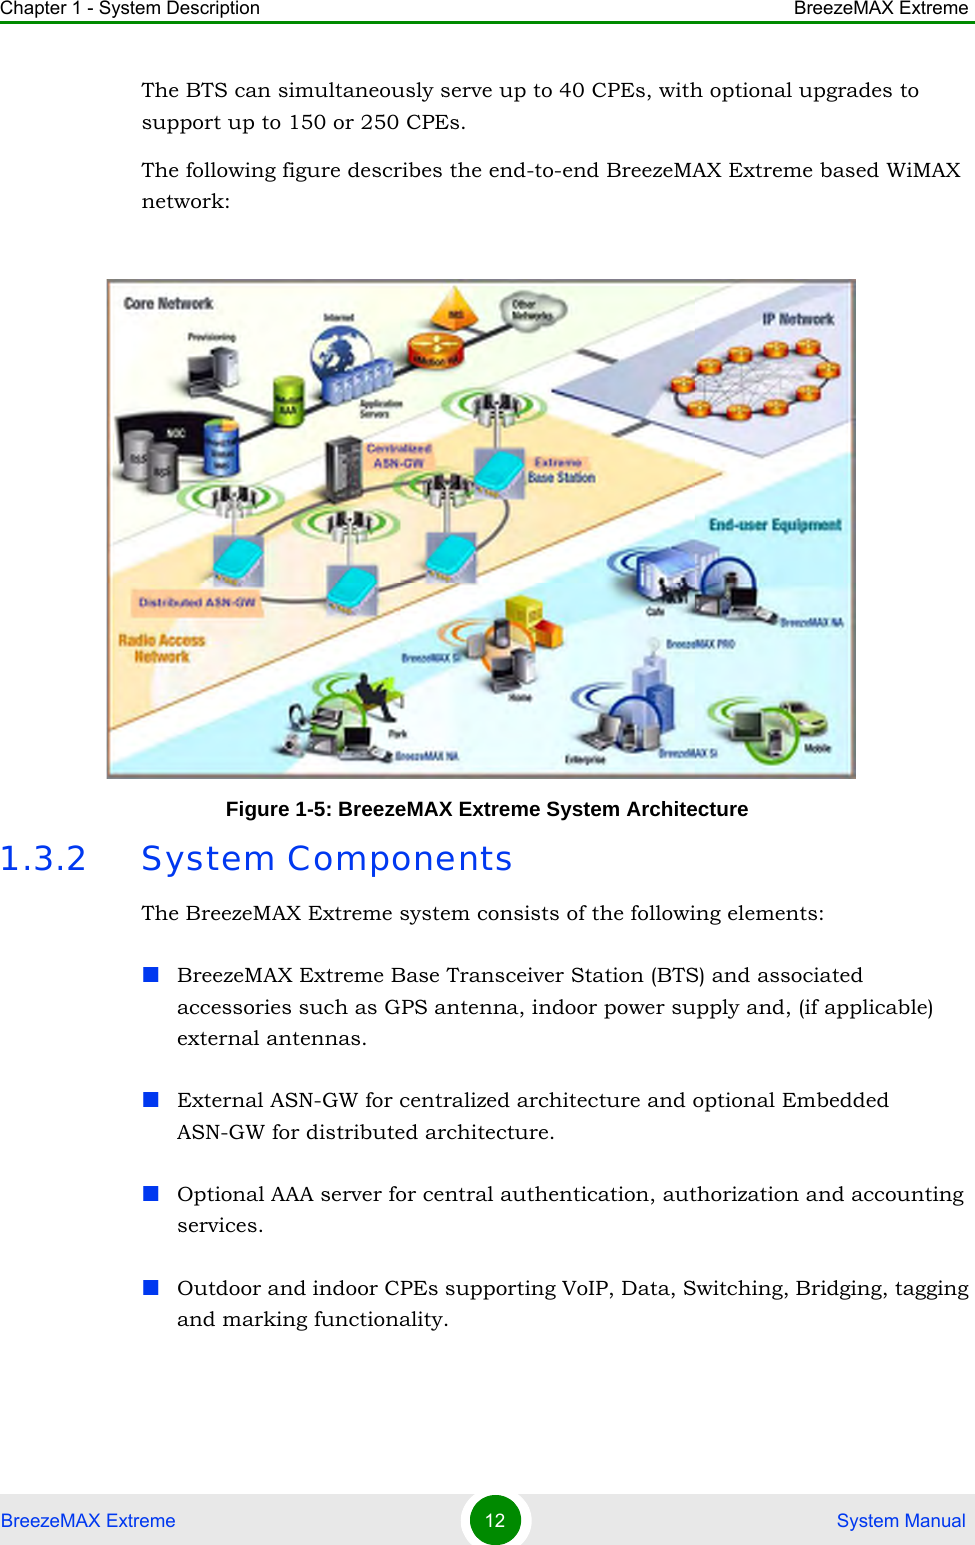 Chapter 1 - System Description BreezeMAX ExtremeBreezeMAX Extreme 12  System ManualThe BTS can simultaneously serve up to 40 CPEs, with optional upgrades to support up to 150 or 250 CPEs.The following figure describes the end-to-end BreezeMAX Extreme based WiMAX network:1.3.2 System ComponentsThe BreezeMAX Extreme system consists of the following elements:BreezeMAX Extreme Base Transceiver Station (BTS) and associated accessories such as GPS antenna, indoor power supply and, (if applicable) external antennas.External ASN-GW for centralized architecture and optional Embedded ASN-GW for distributed architecture.Optional AAA server for central authentication, authorization and accounting services.Outdoor and indoor CPEs supporting VoIP, Data, Switching, Bridging, tagging and marking functionality.Figure 1-5: BreezeMAX Extreme System Architecture